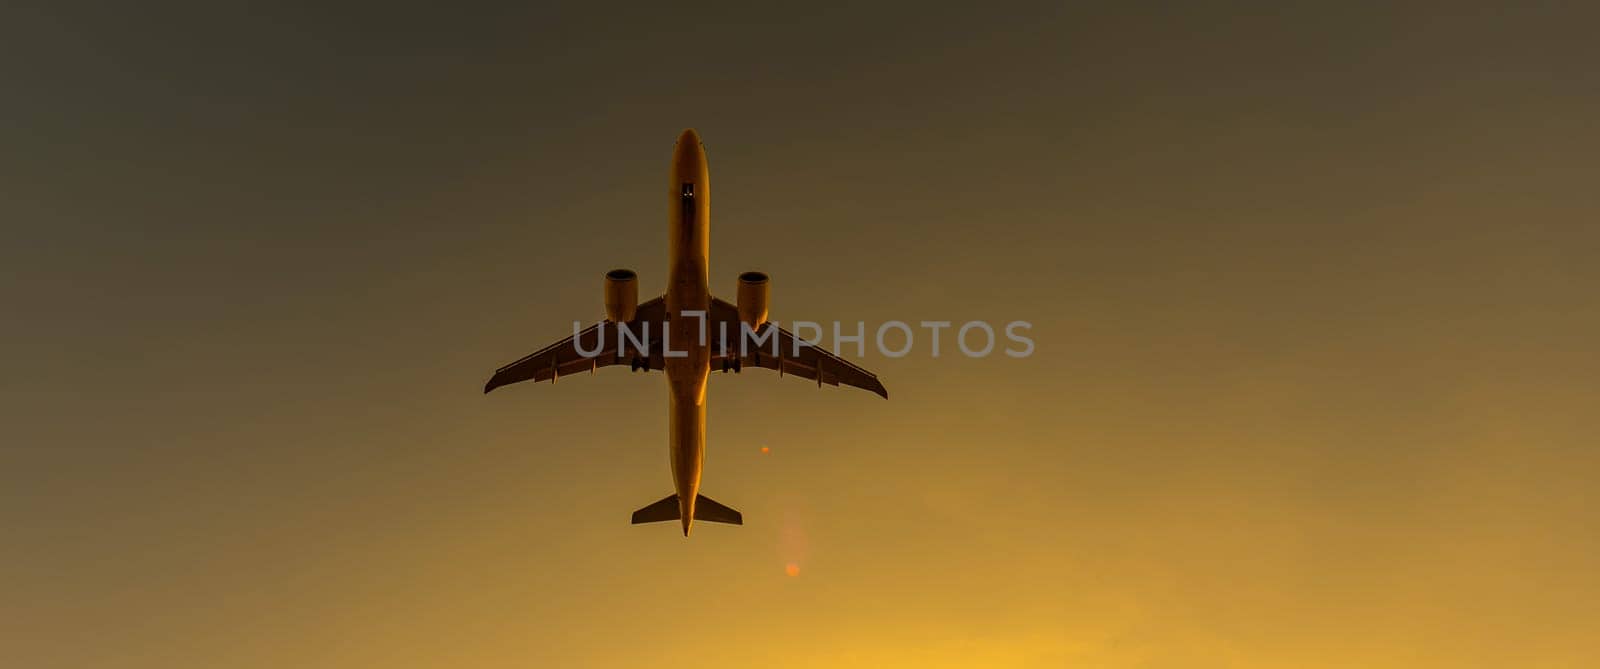 Bottom view of a flying plane at sunset. Widescreen